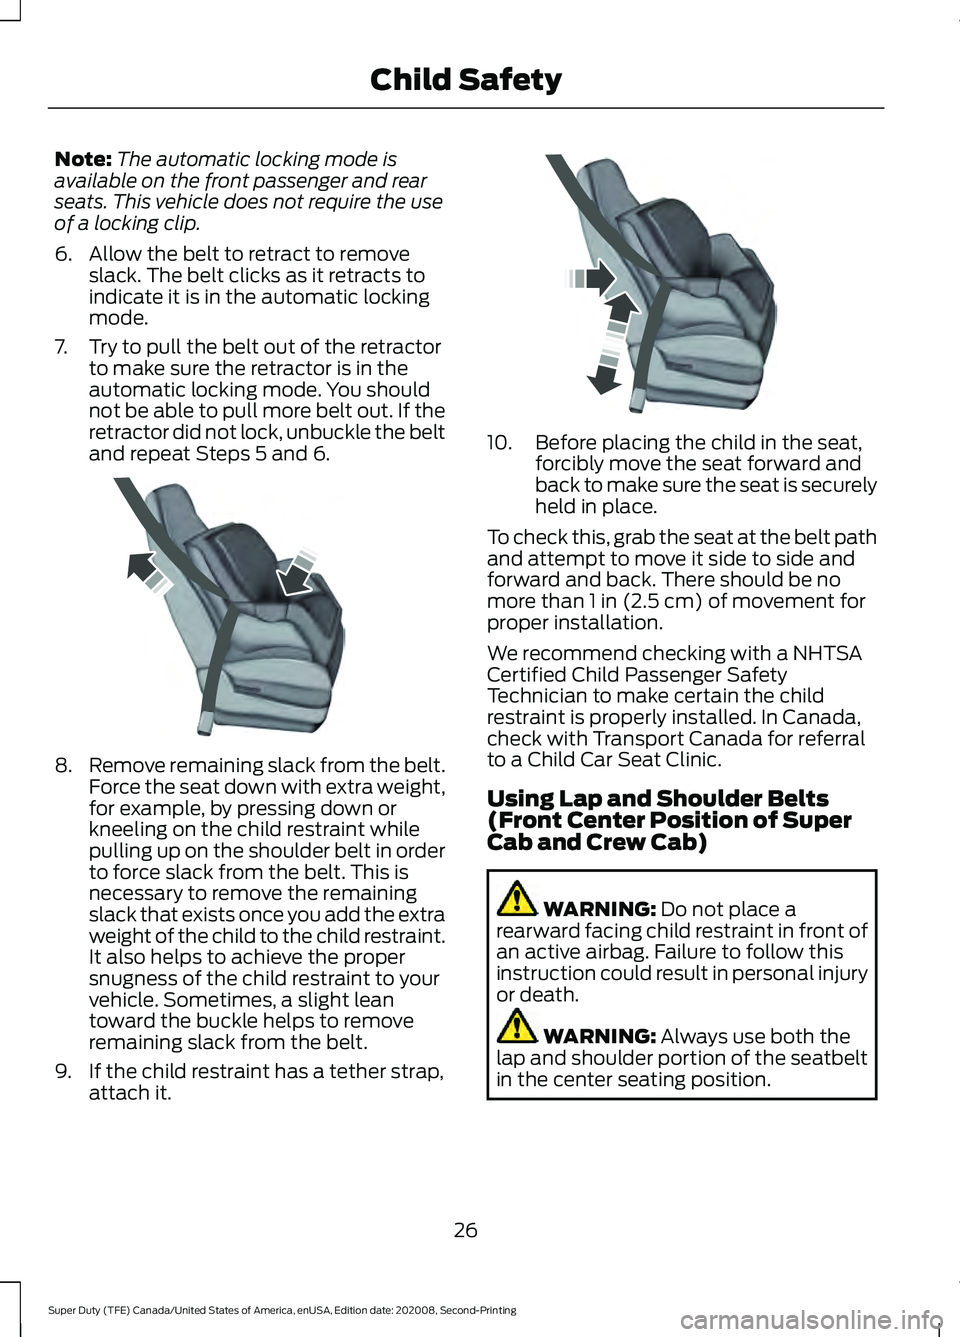 FORD SUPER DUTY 2021  Owners Manual Note:
The automatic locking mode is
available on the front passenger and rear
seats. This vehicle does not require the use
of a locking clip.
6. Allow the belt to retract to remove slack. The belt cli